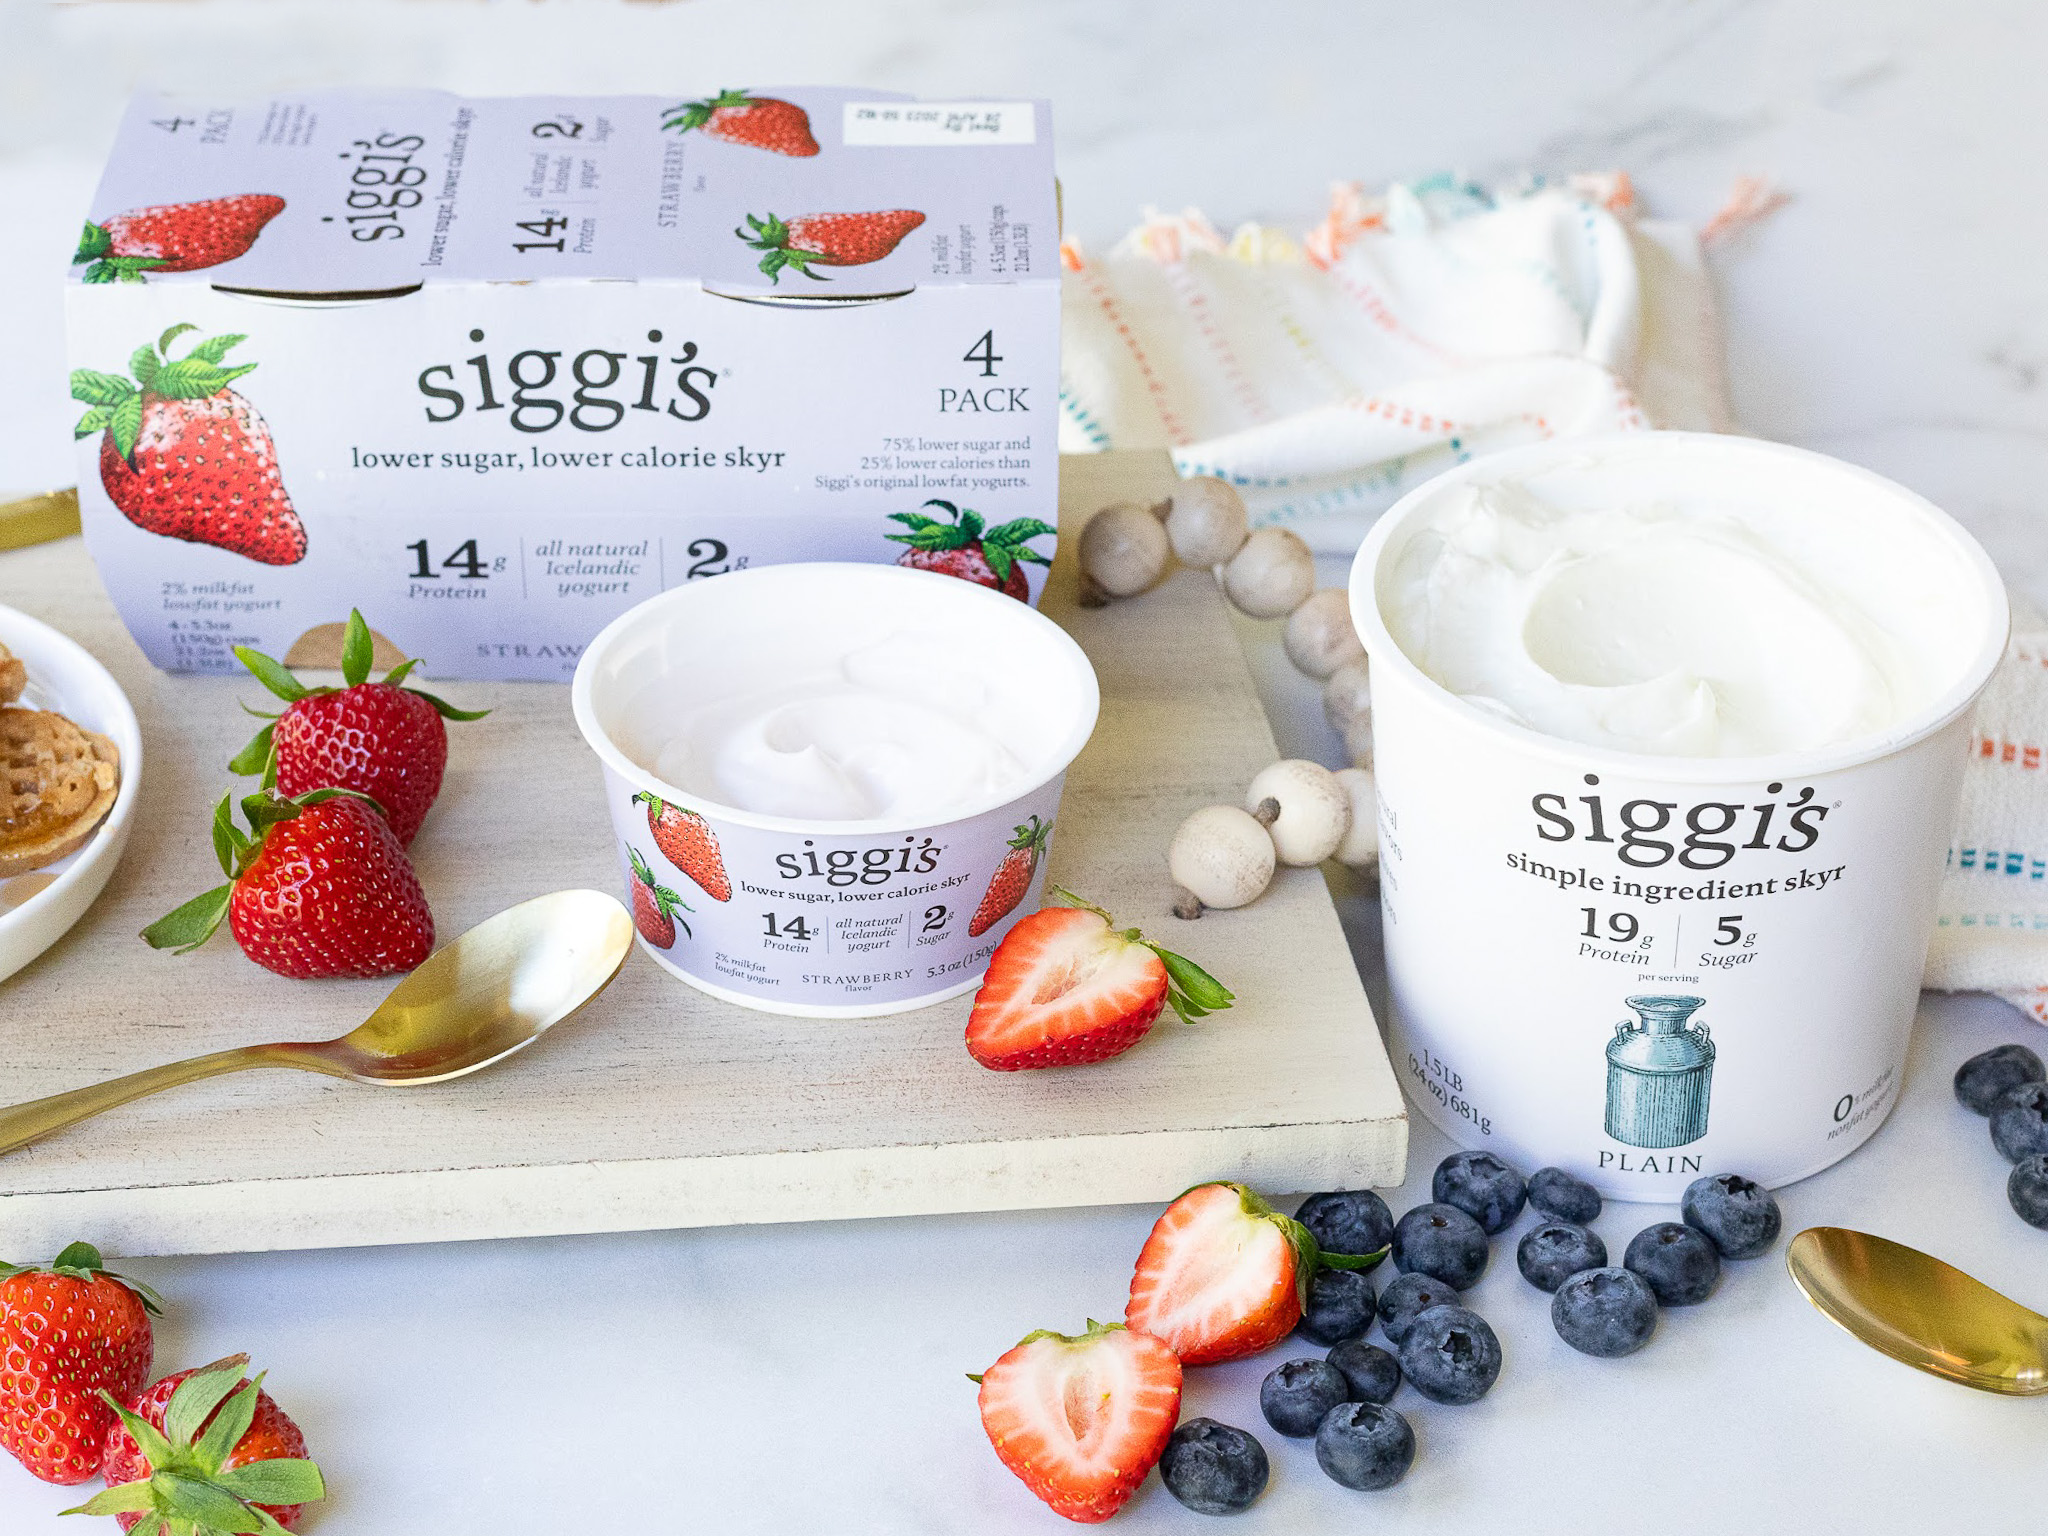 Delicious siggi’s® Icelandic style skyr Is On Sale At Publix – Buy One, Get One FREE